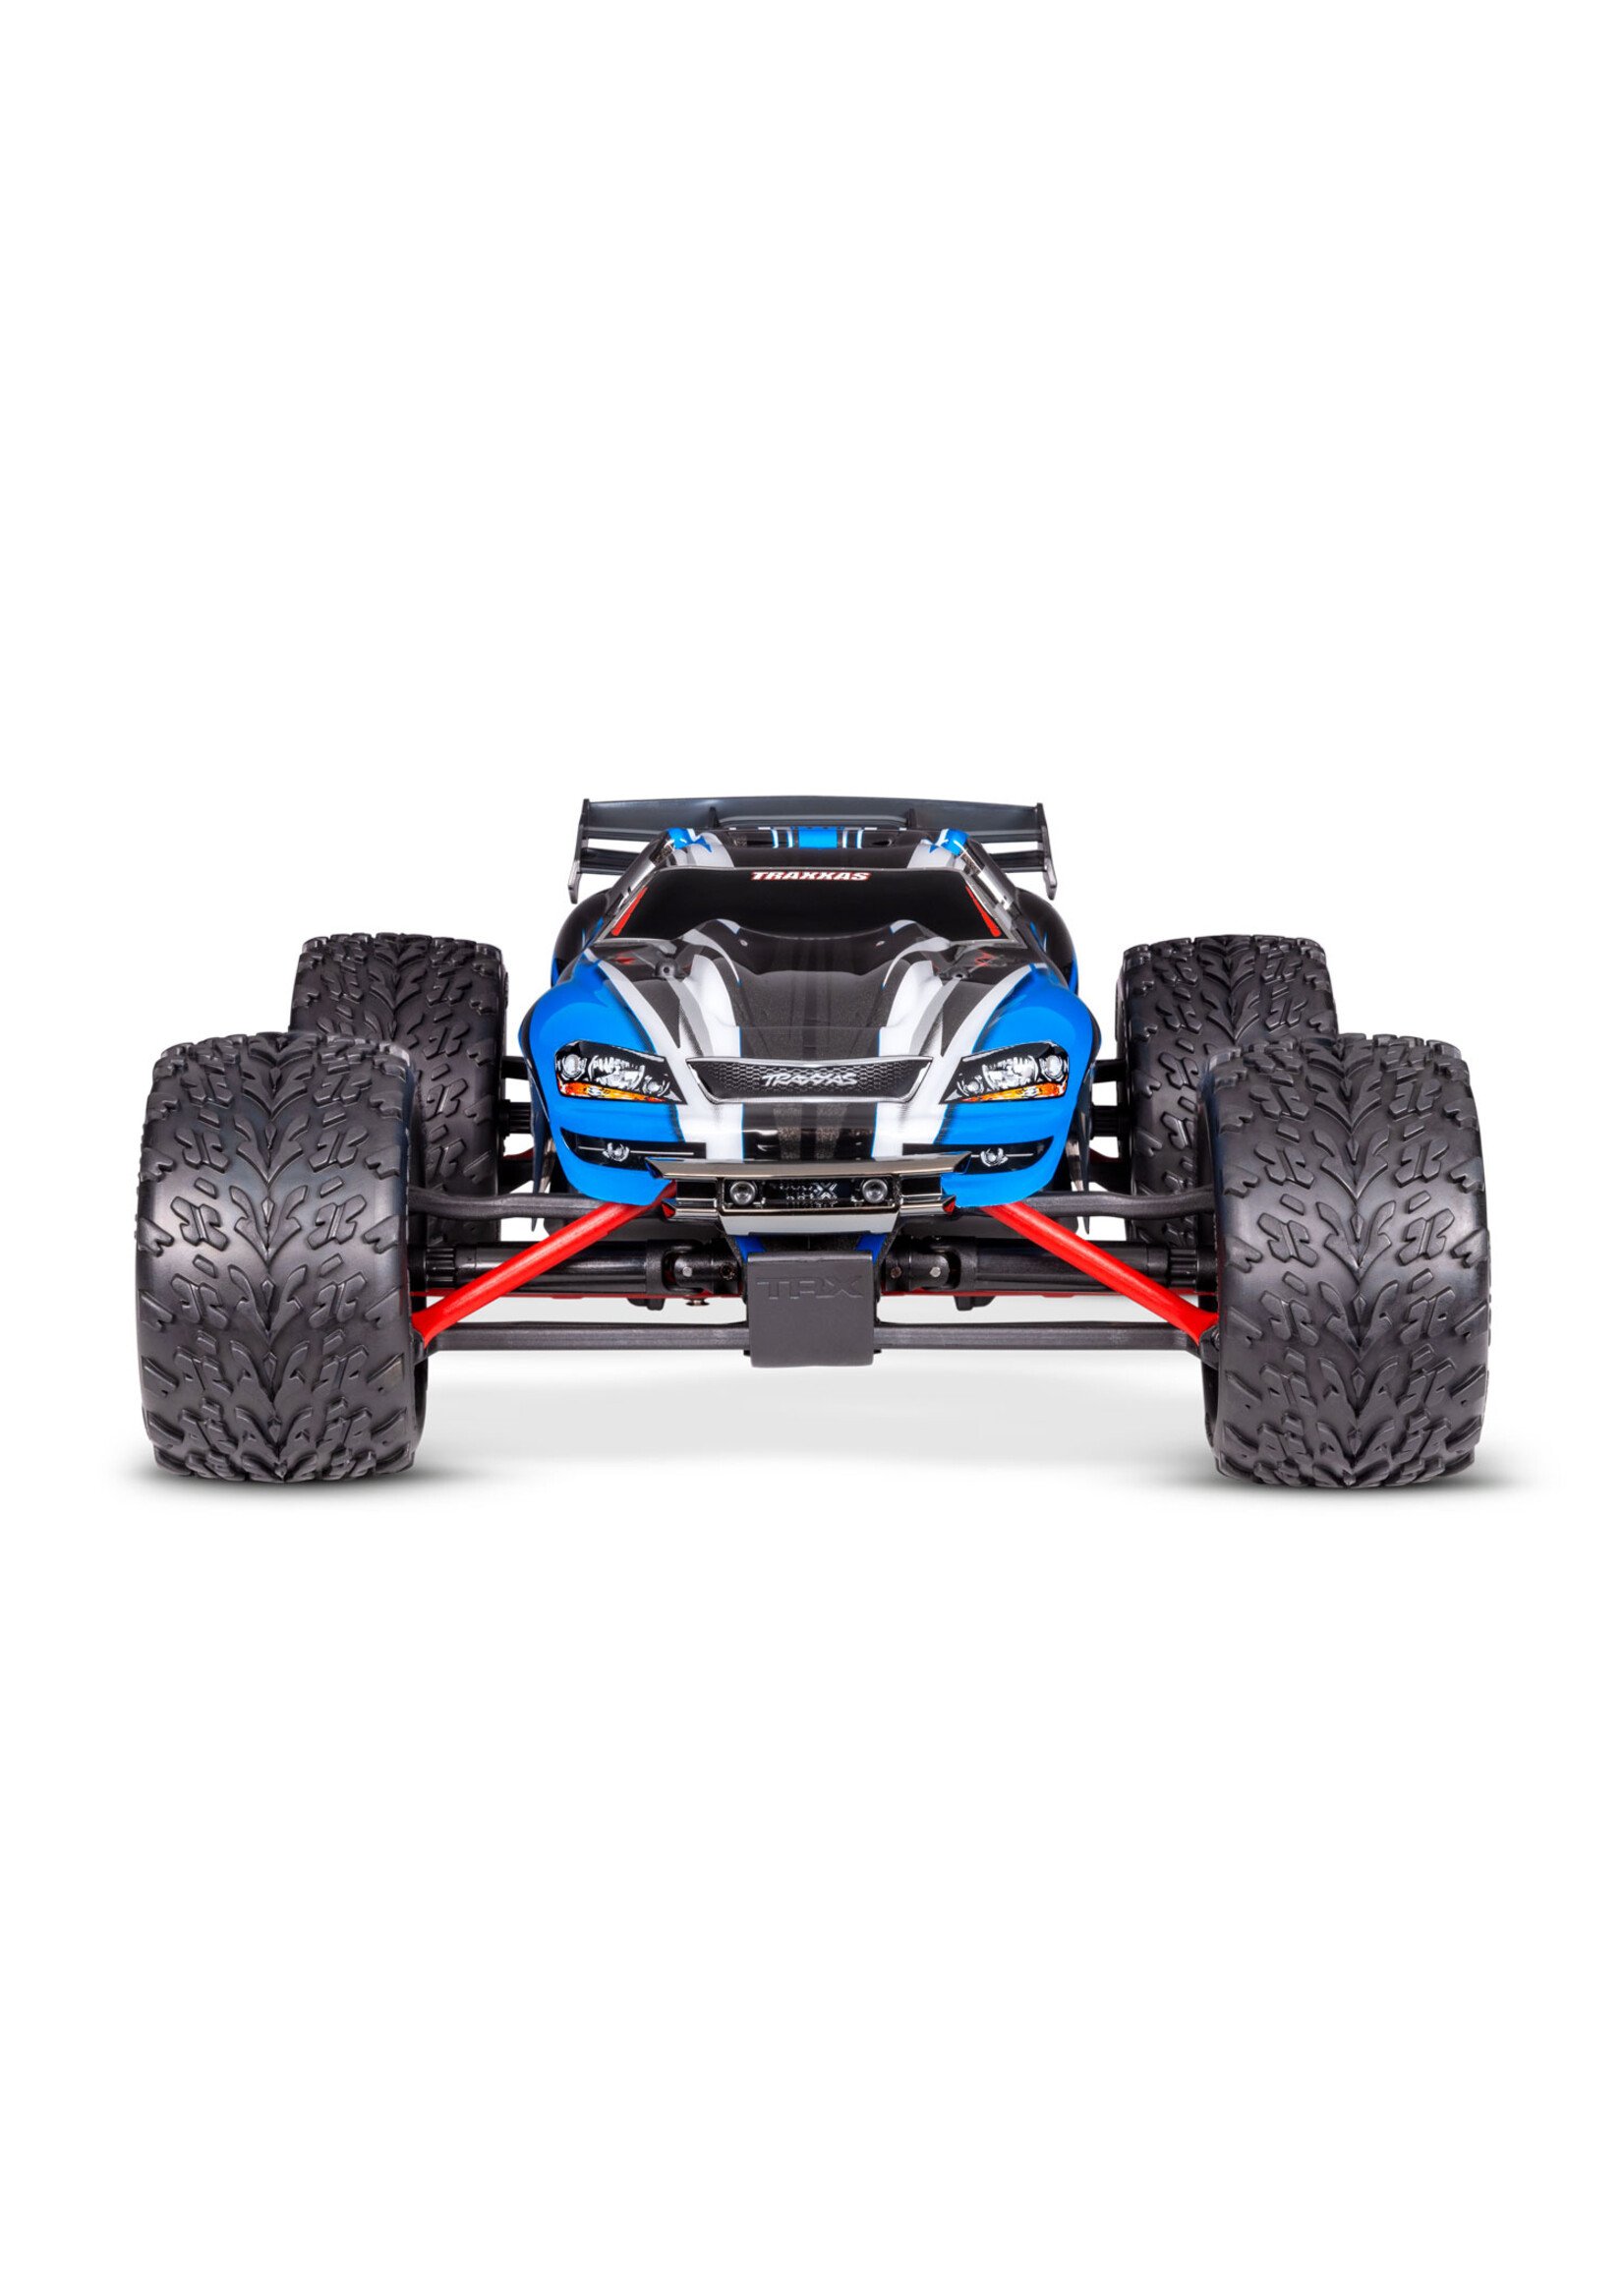 Traxxas 1/16 E-Revo RTR Car With USB-C Charger - Blue